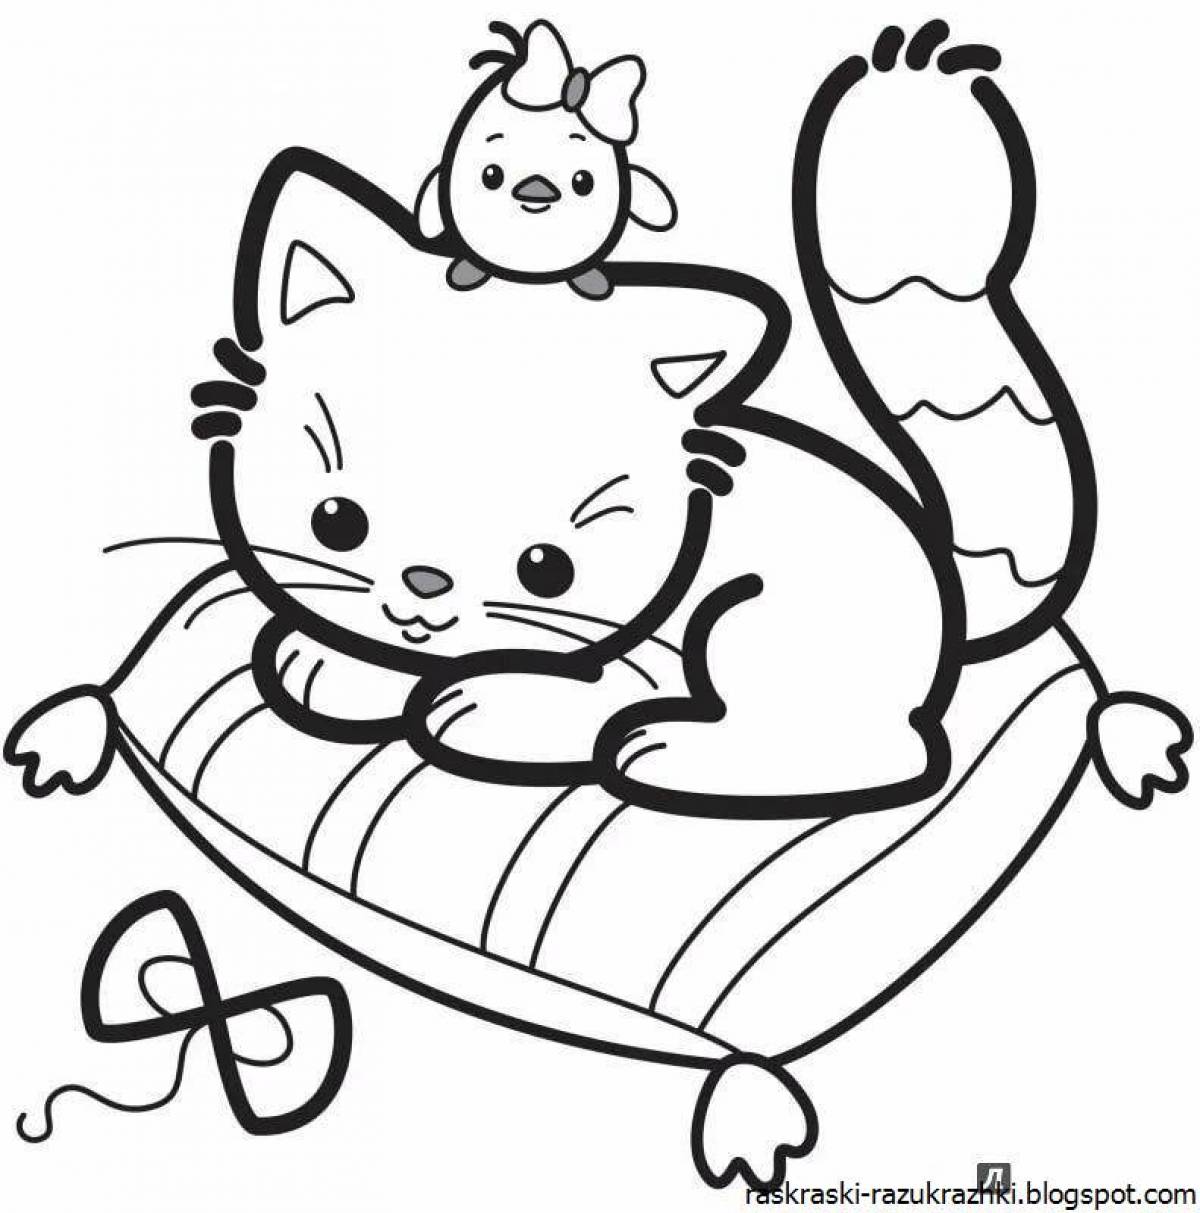 Smiling kitten coloring book for kids